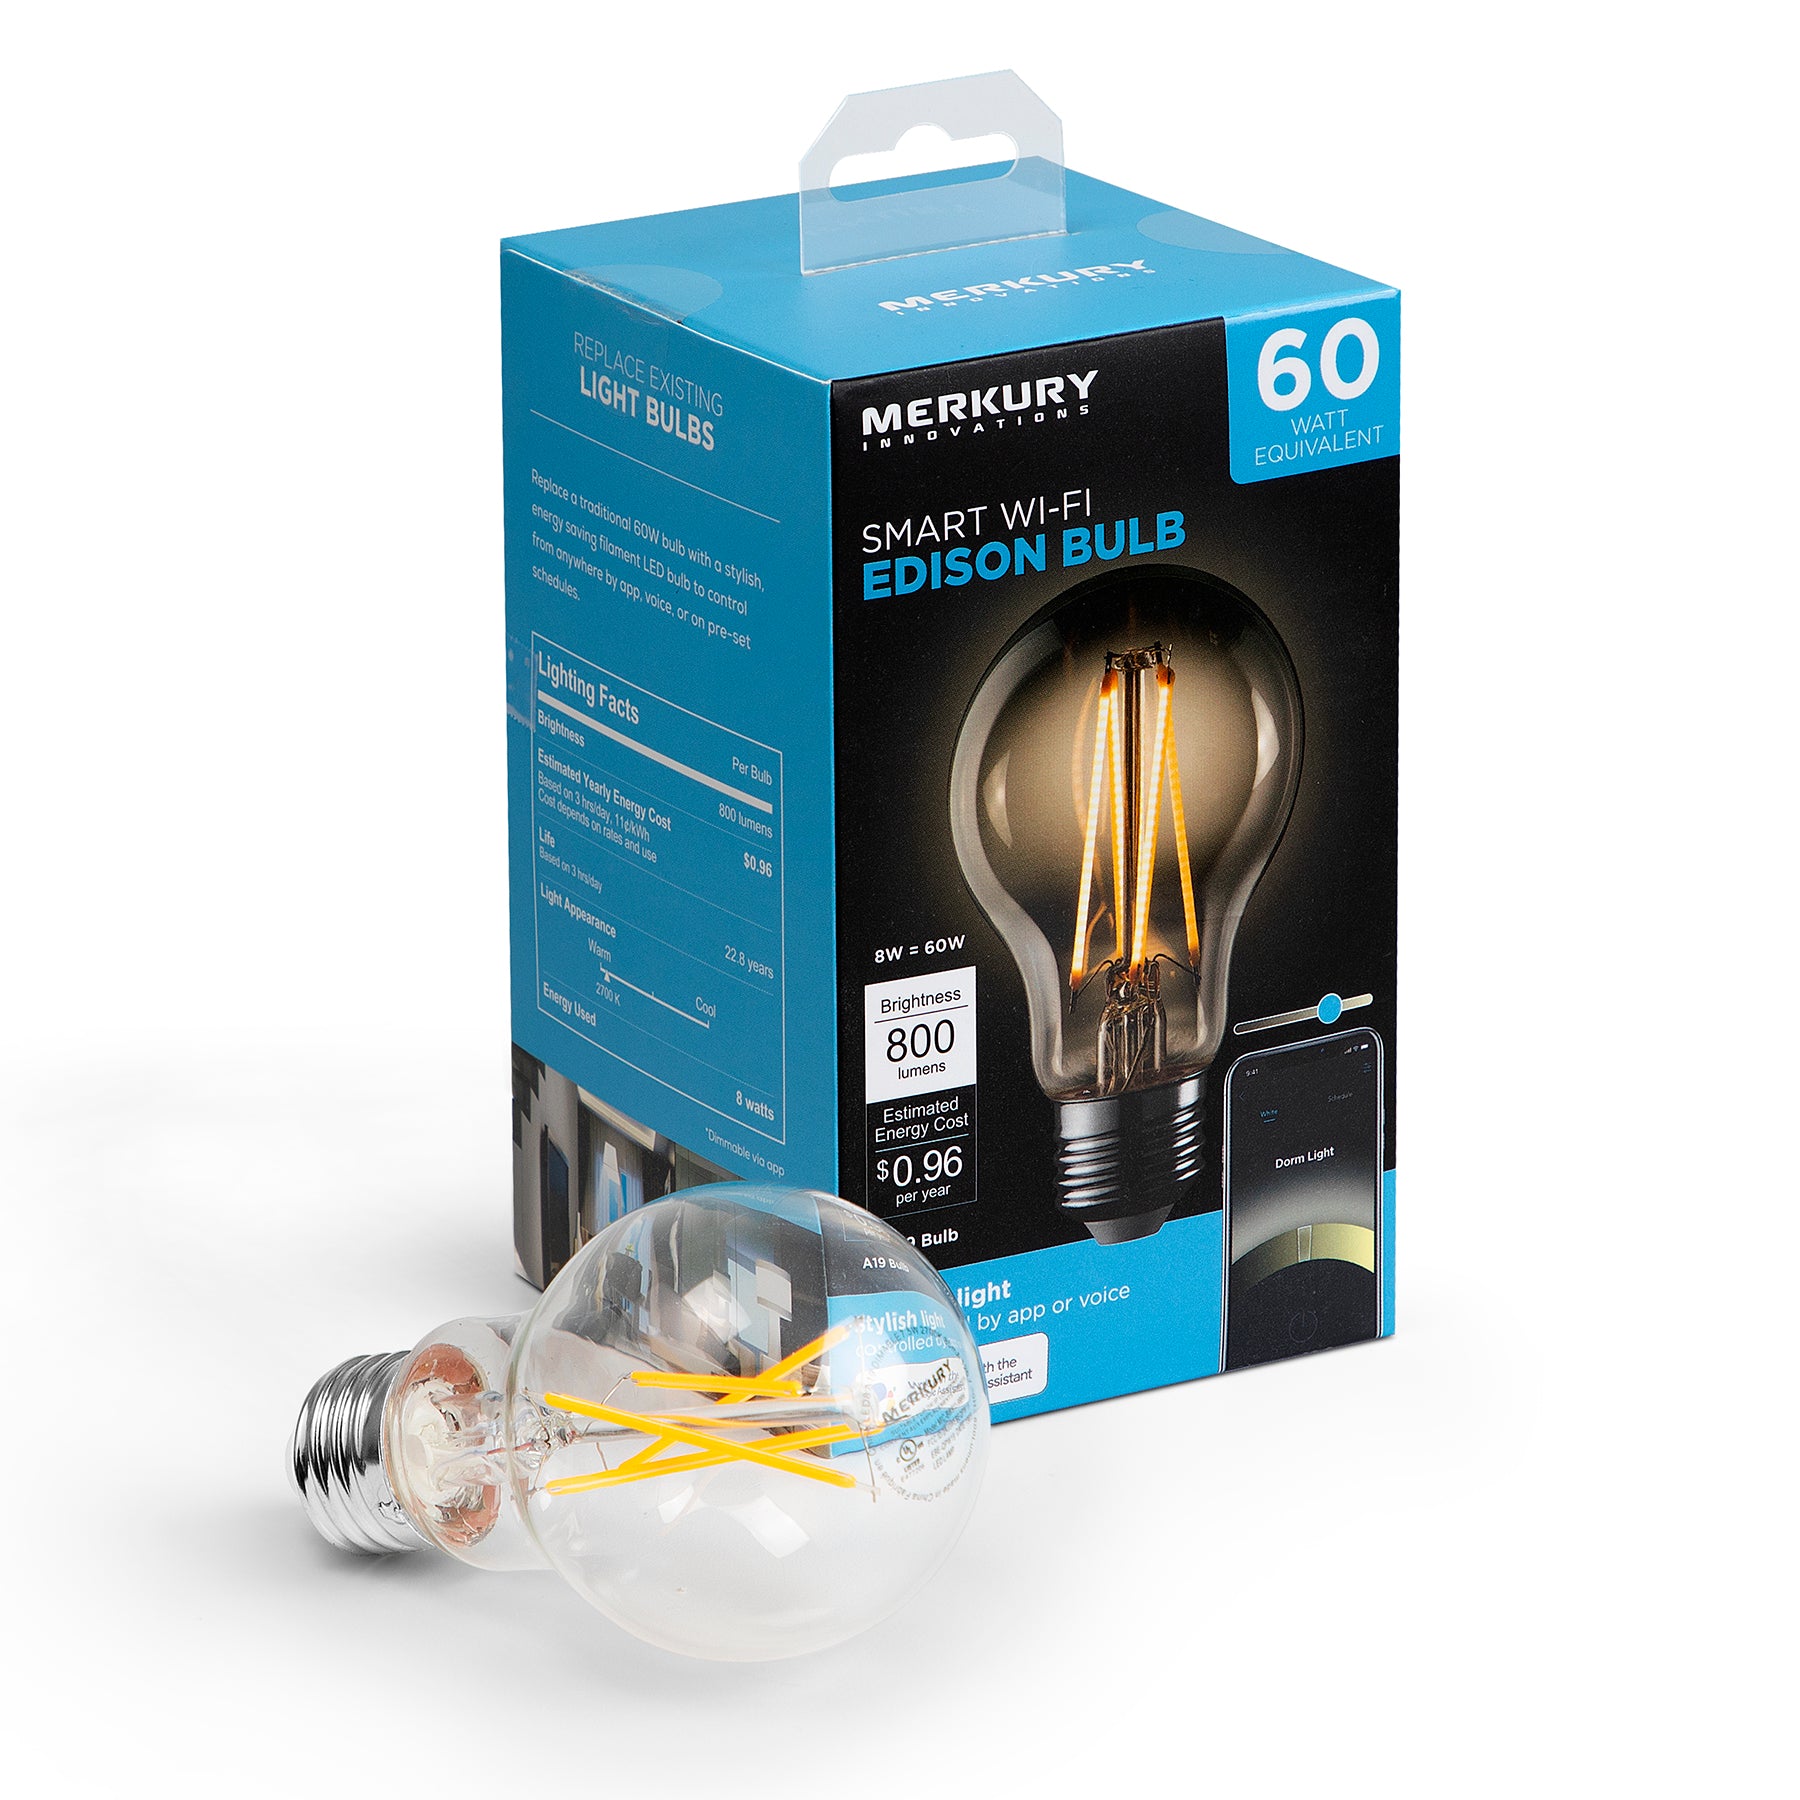 Merkury Innovations A19 Wi-Fi LED Smart Bulb 60W Glass Vintage Edison Style, Requires 2.4GHz Wi-Fi